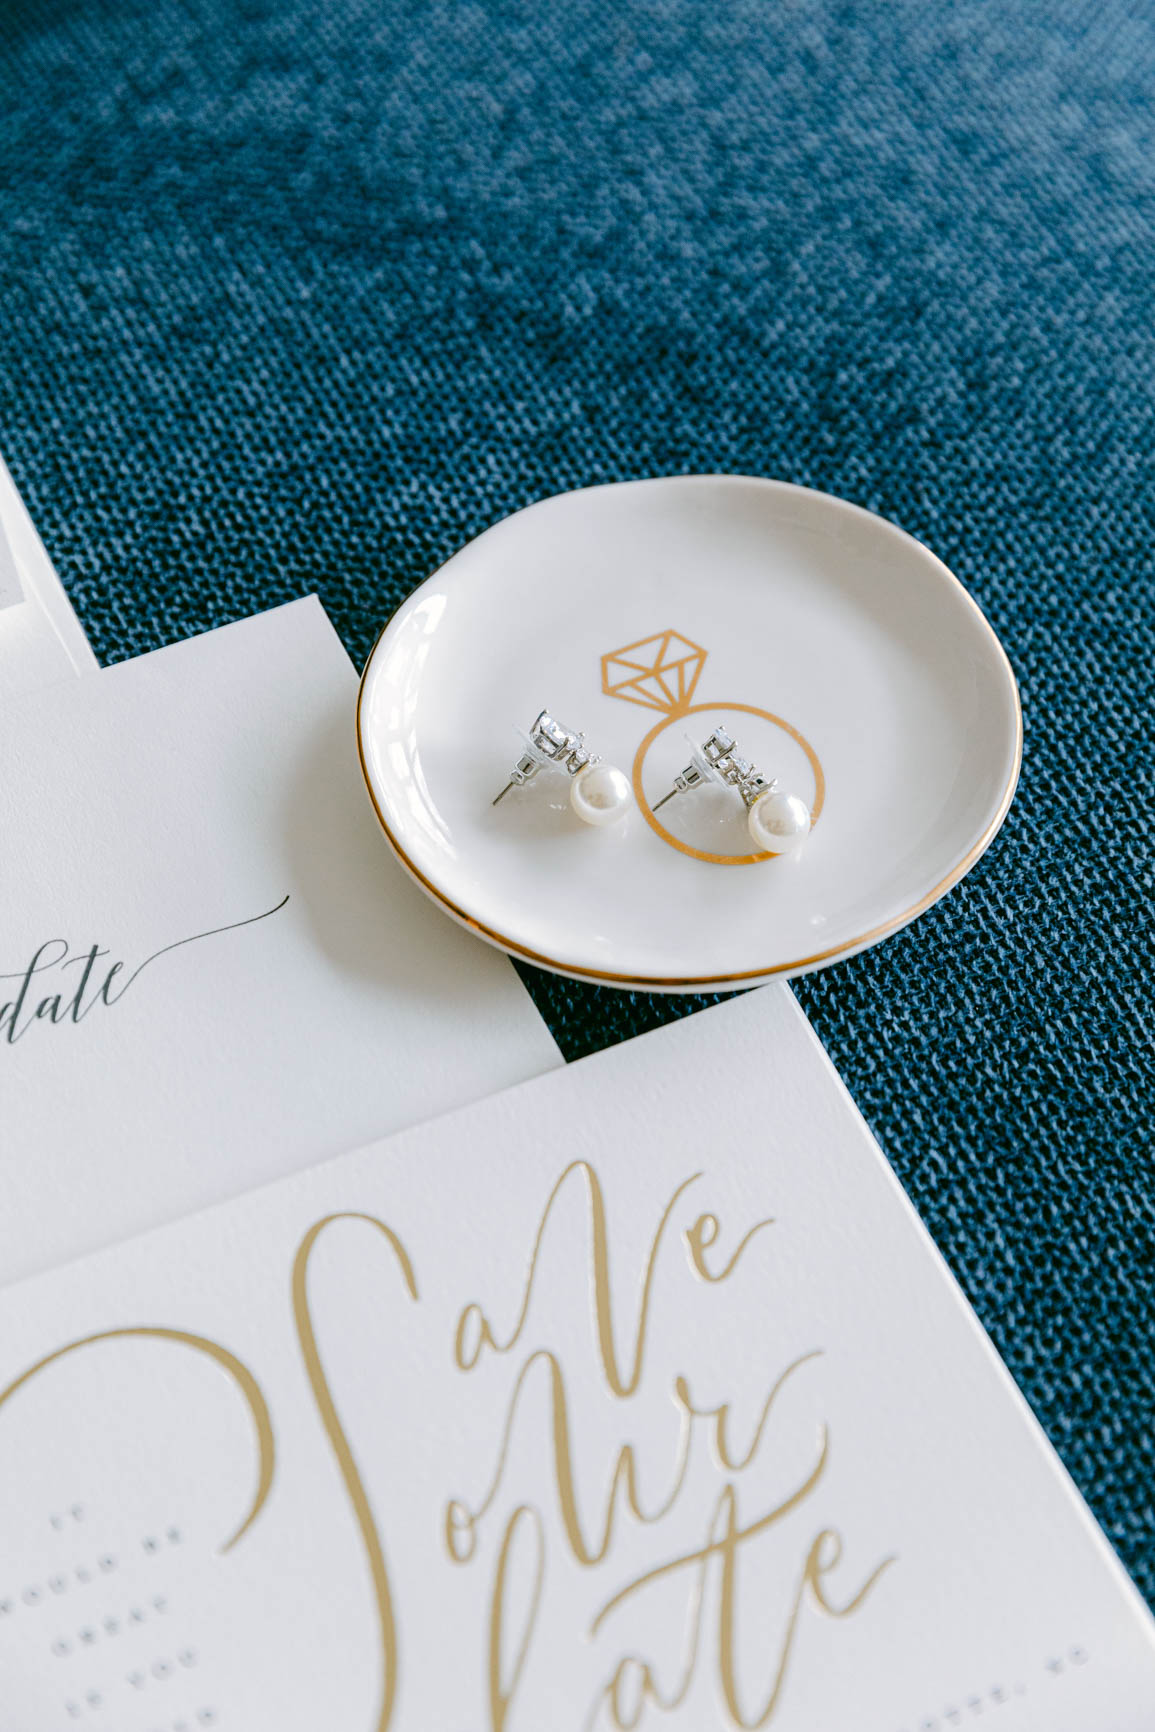 wedding details with earrings shot by Nhieu Tang Photography | nhieutang.com